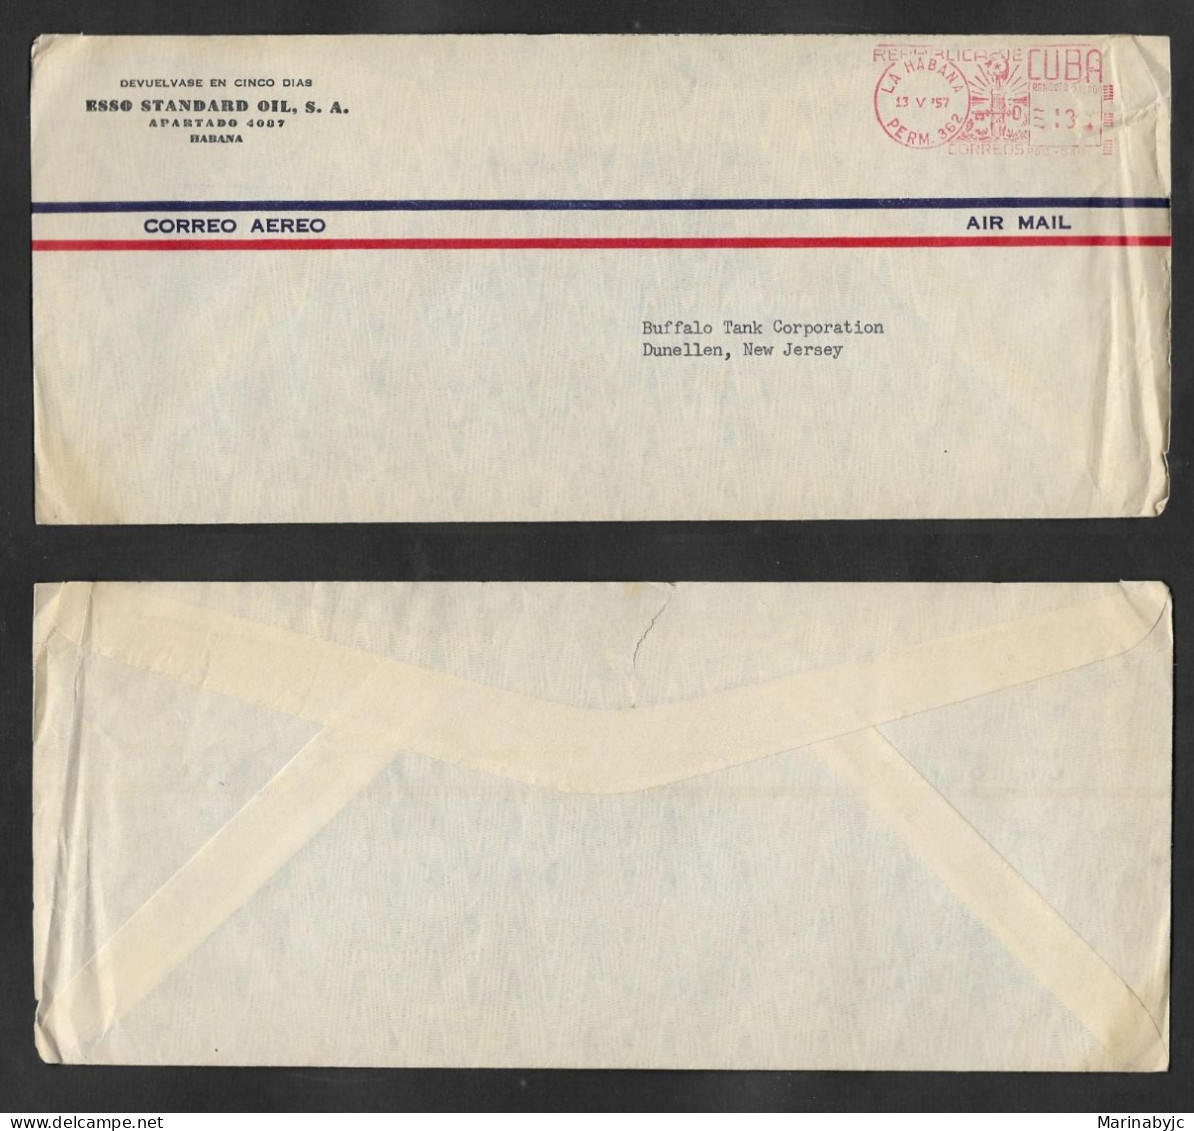 SE)1957 CUBA, COMMERCIAL ENVELOPE WITH MECHANICAL POSTAGE CUBA, AIR MAIL, CIRCULATED FROM HAVANA TO NEW JERSEY, VF - Usados